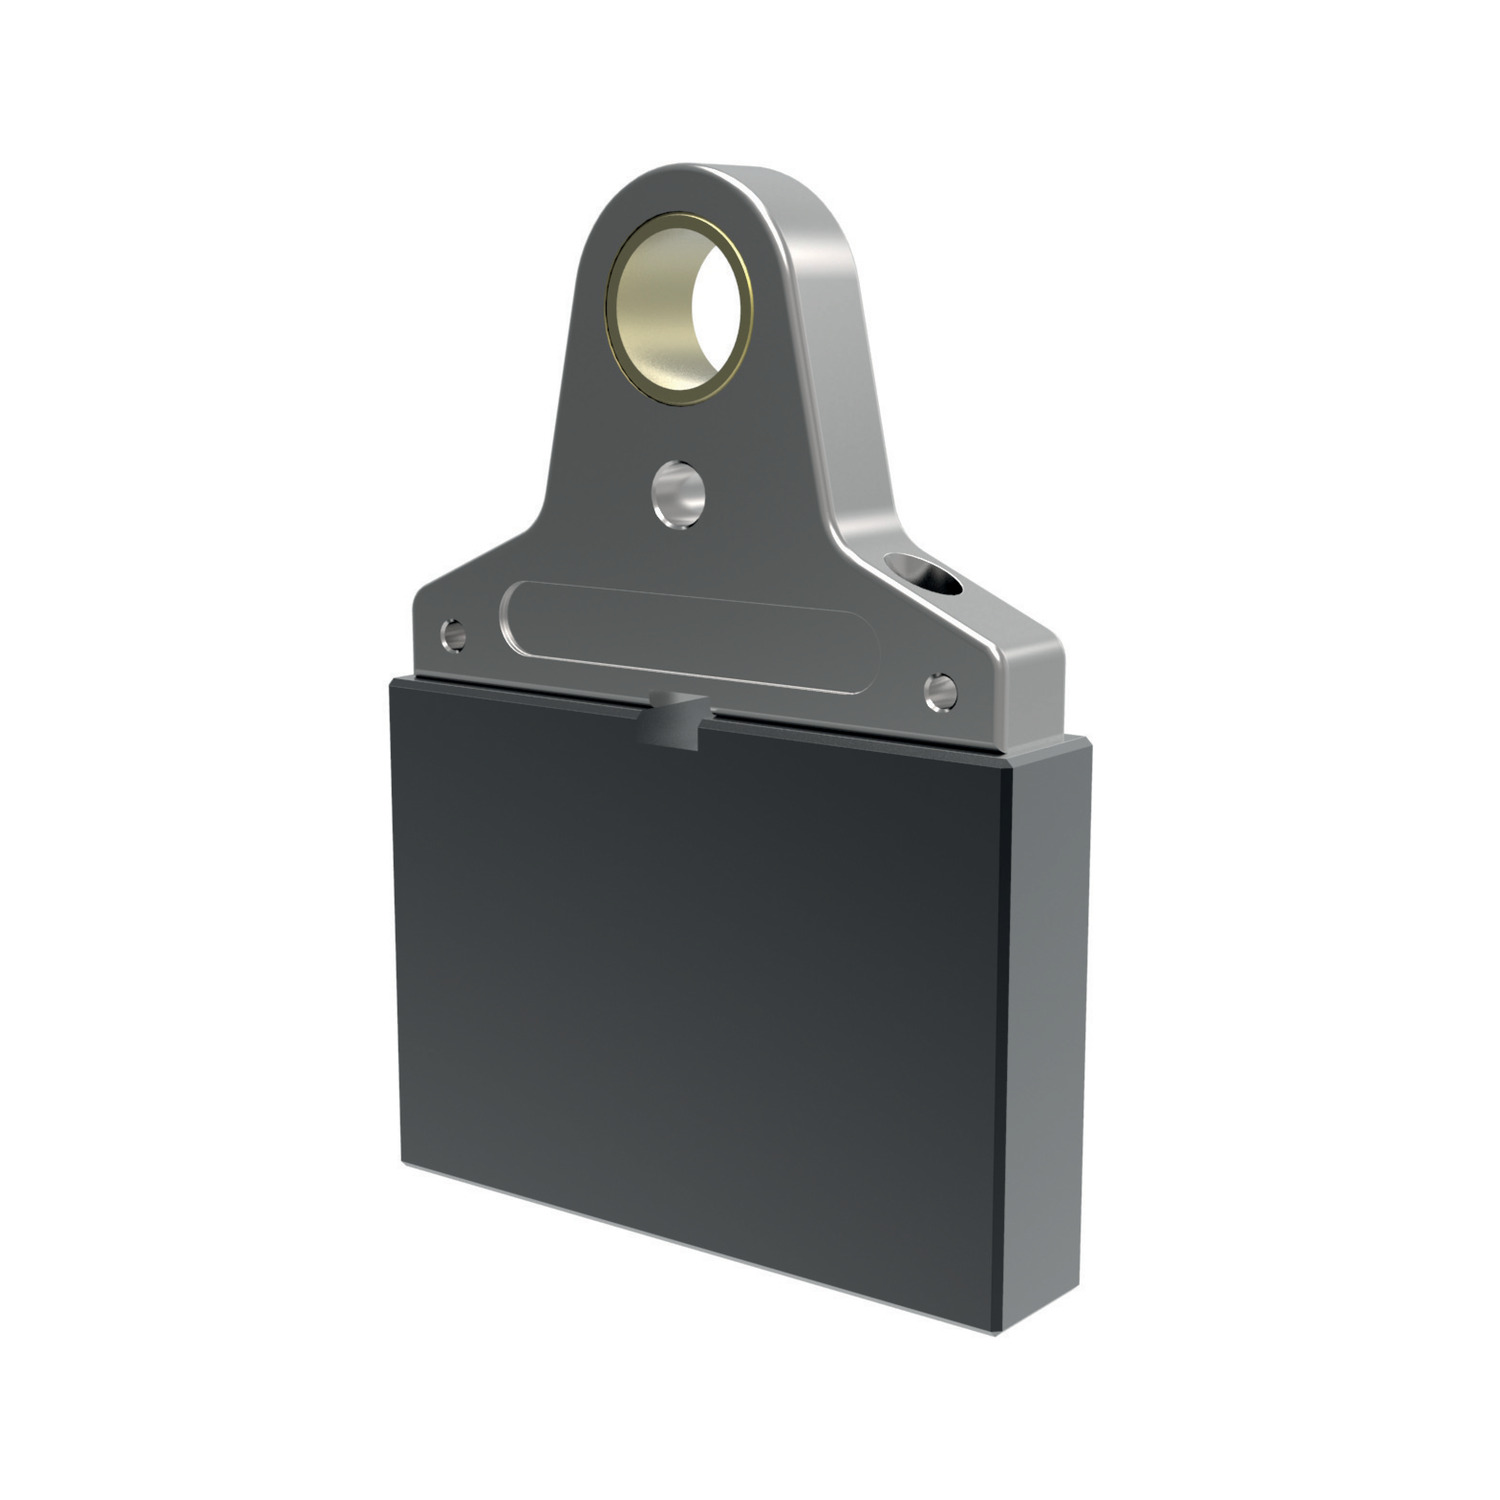 Product 19771, Support Bracket - ReLock 8 for 8 station vice / 